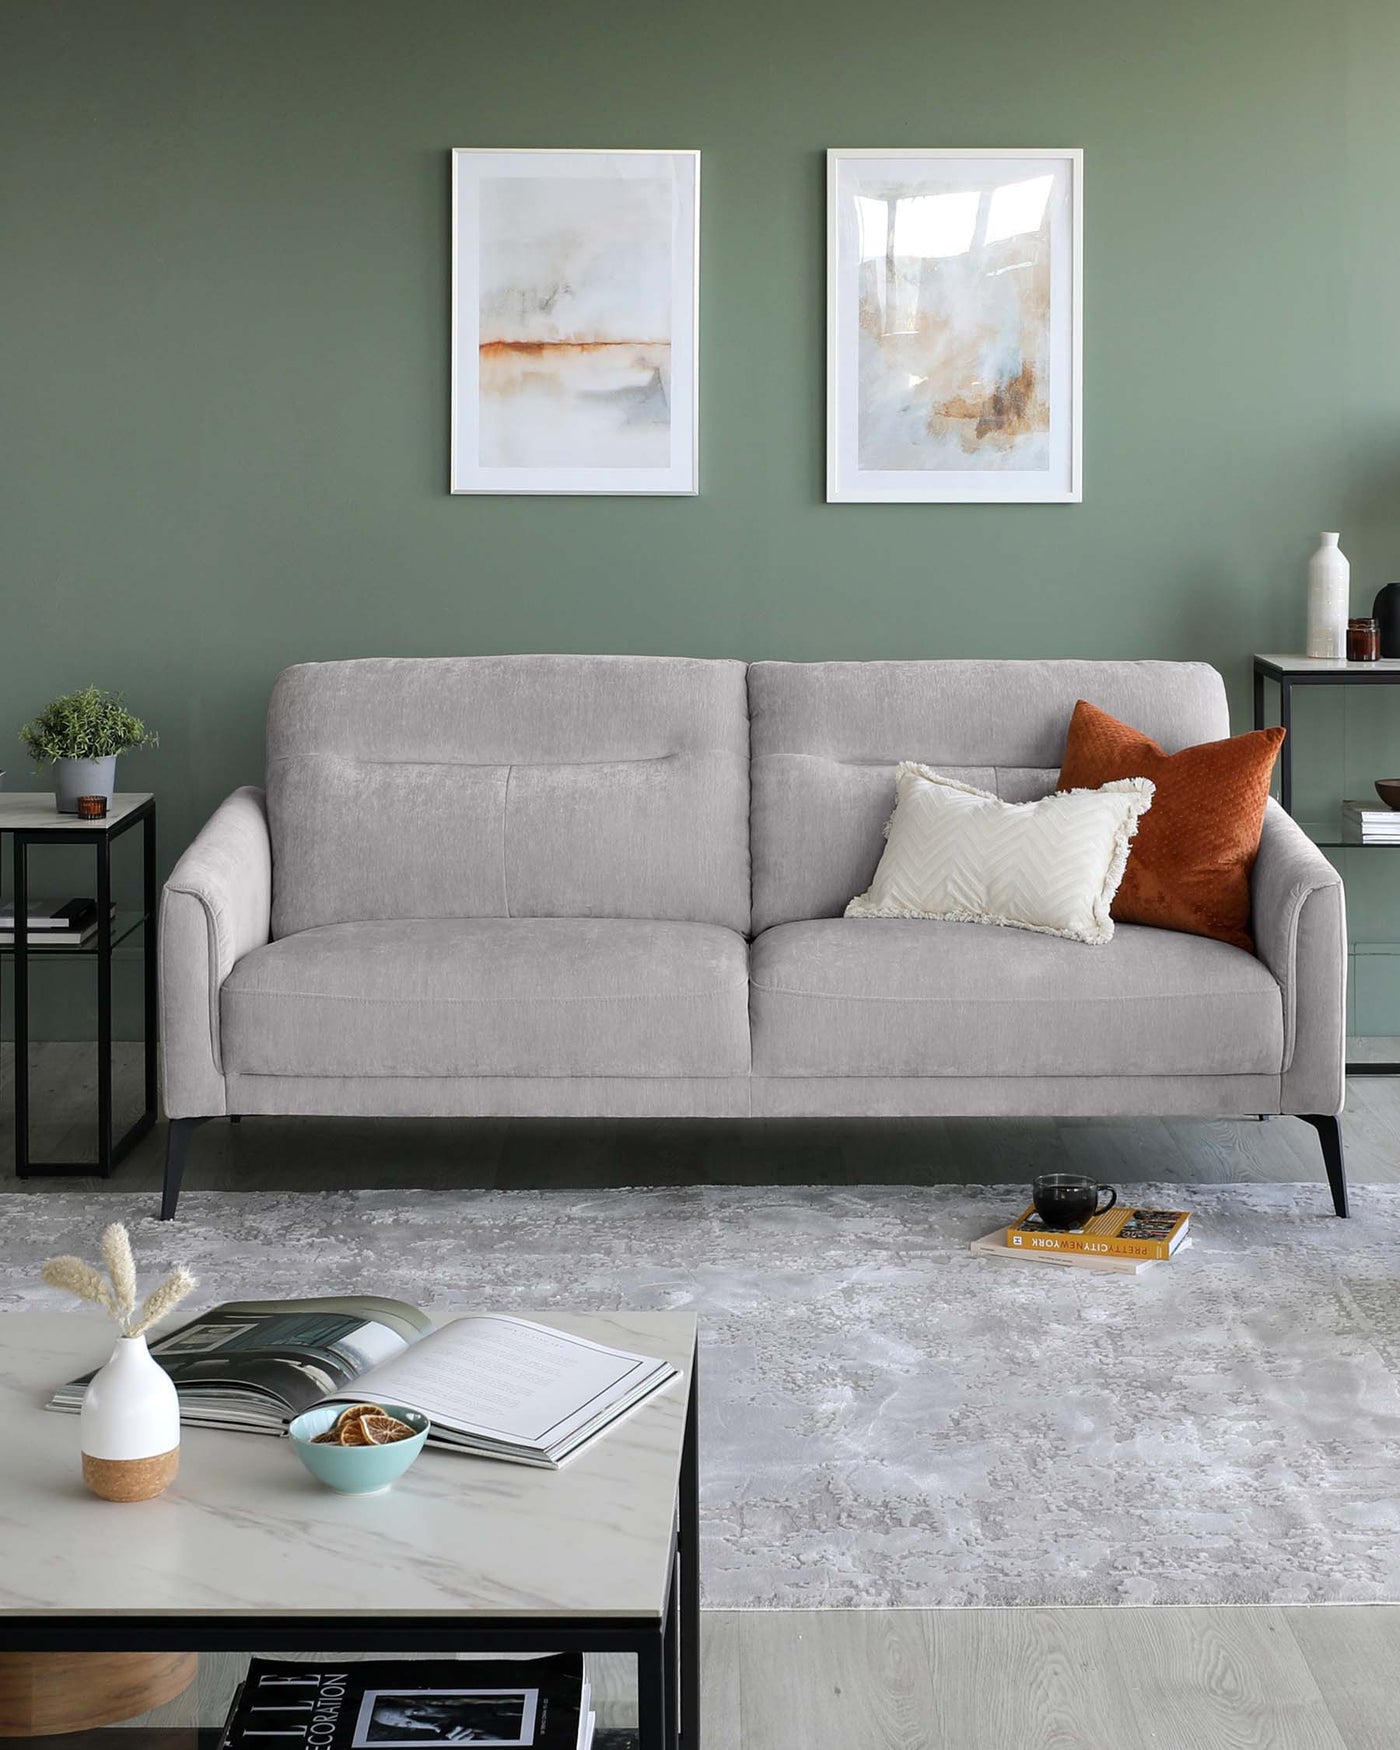 Modern minimalist living room with a light grey fabric three-seater sofa, featuring clean lines and slender metal legs. Accompanying the sofa are two small square side tables with a black metal frame and a dark wood top. A large, rectangular marble coffee table sits at the centre with a mix of decorative items and books on top, resting on a textured grey area rug.